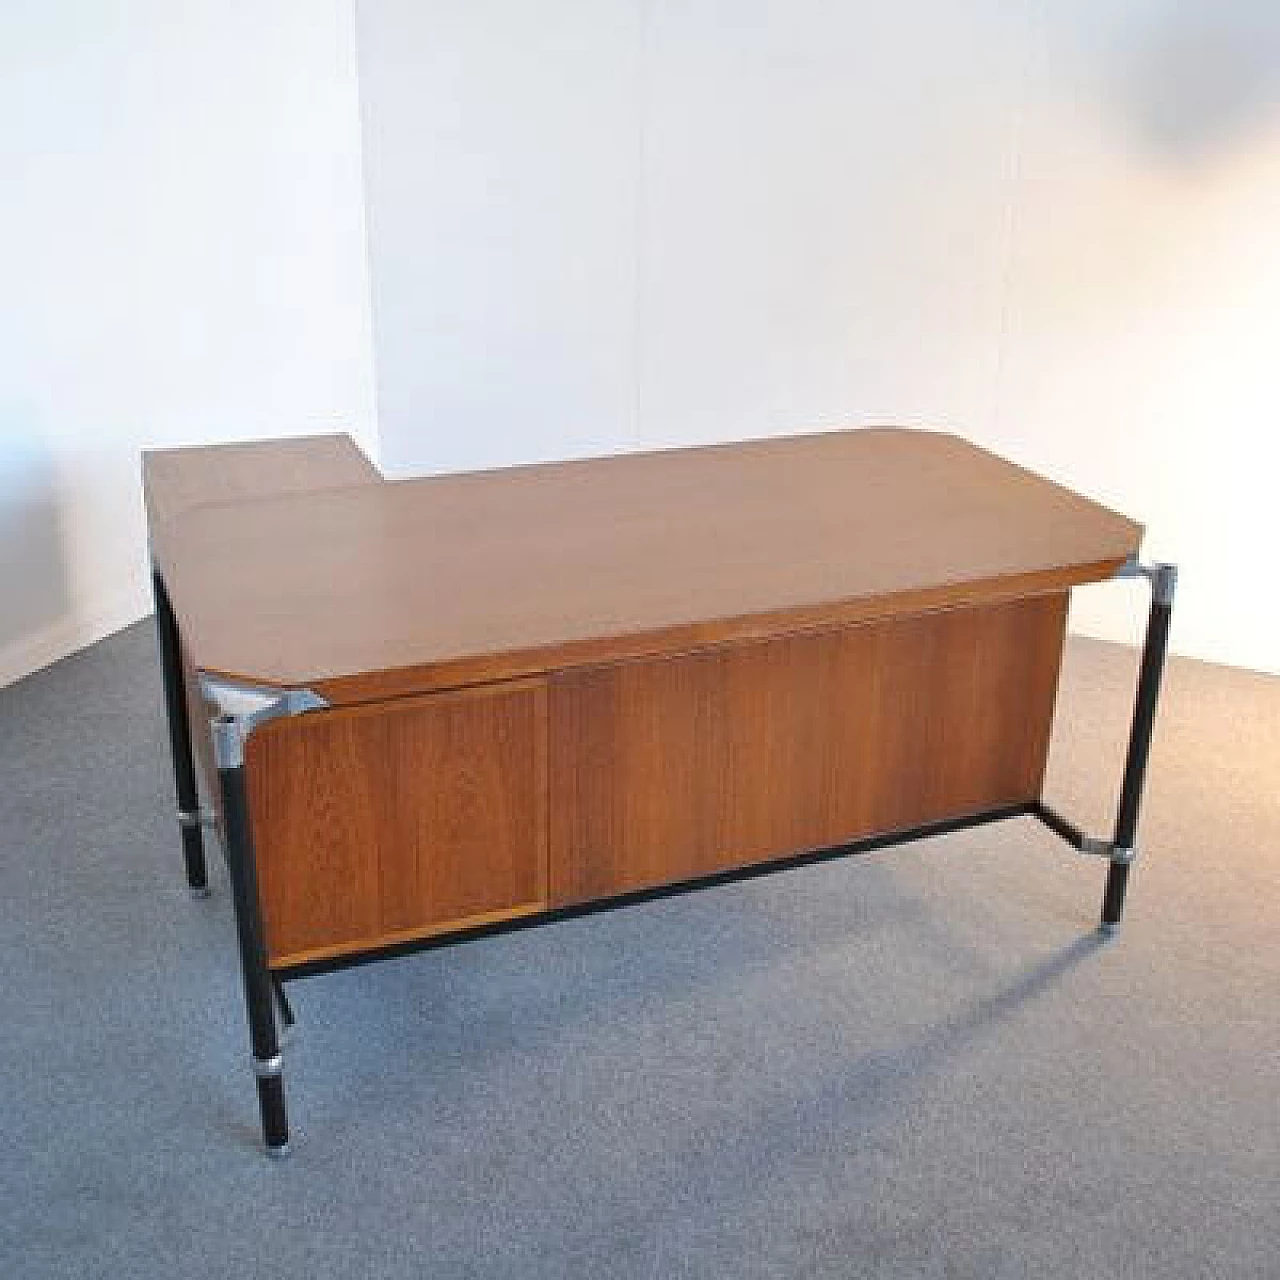 Executive desk by Ico Parisi for MIM Rome, 1950s 1452506